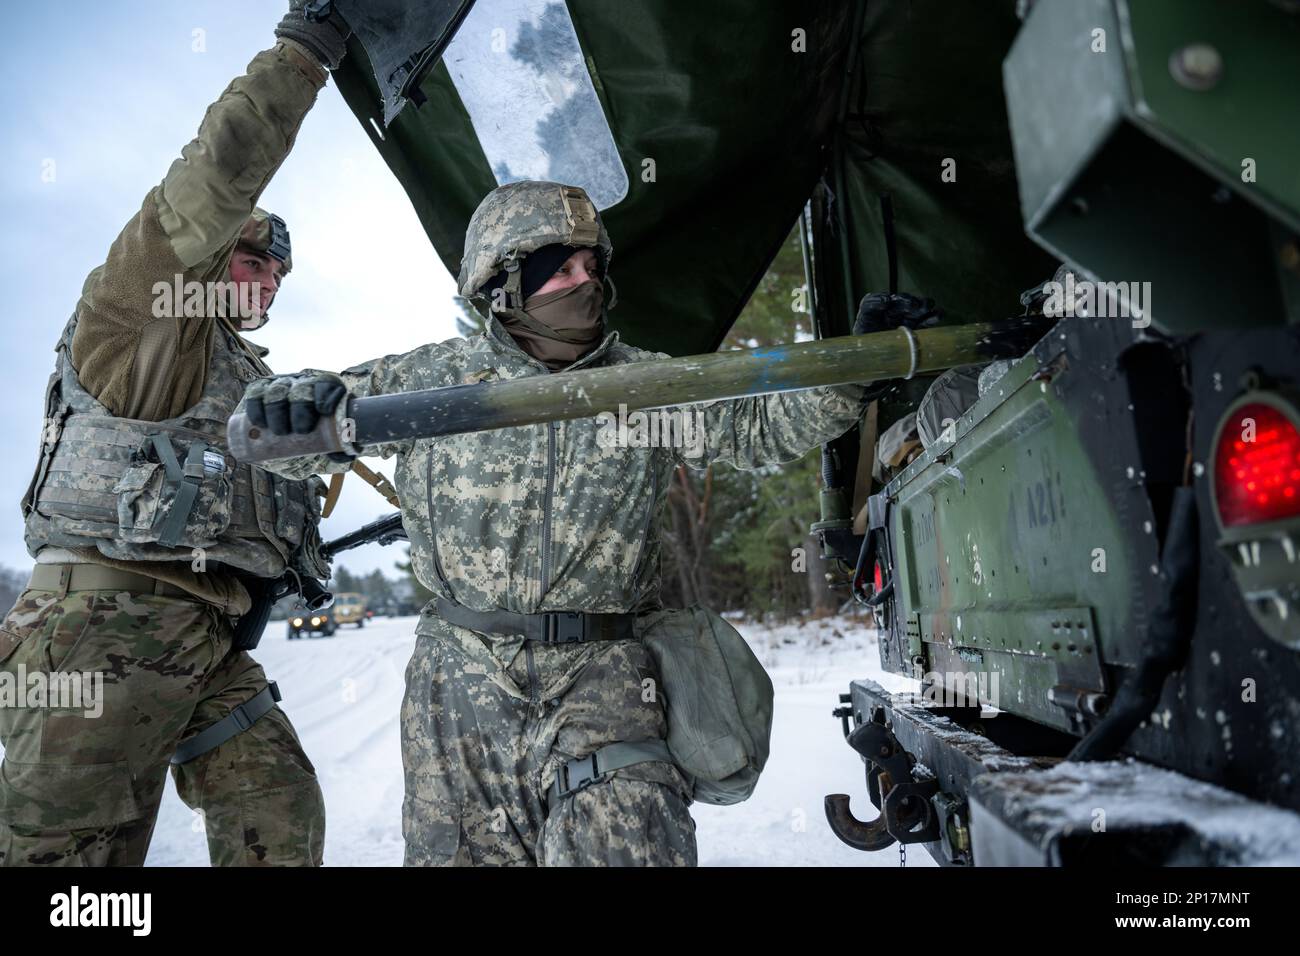 Army Sgt. Meranda Leisgana gets help from Pfc. Cameron Patzner, both from 1-120th Field Artillery Regiment, as she pulls out a crossbar for the M119 howitzer during Northern Strike 23-1, Jan. 25, 2023, at Camp Grayling, Mich. Units that participate in Northern Strike’s winter iteration build readiness by conducting joint, cold-weather training designed to meet objectives of the Department of Defense’s Arctic Strategy. Stock Photo